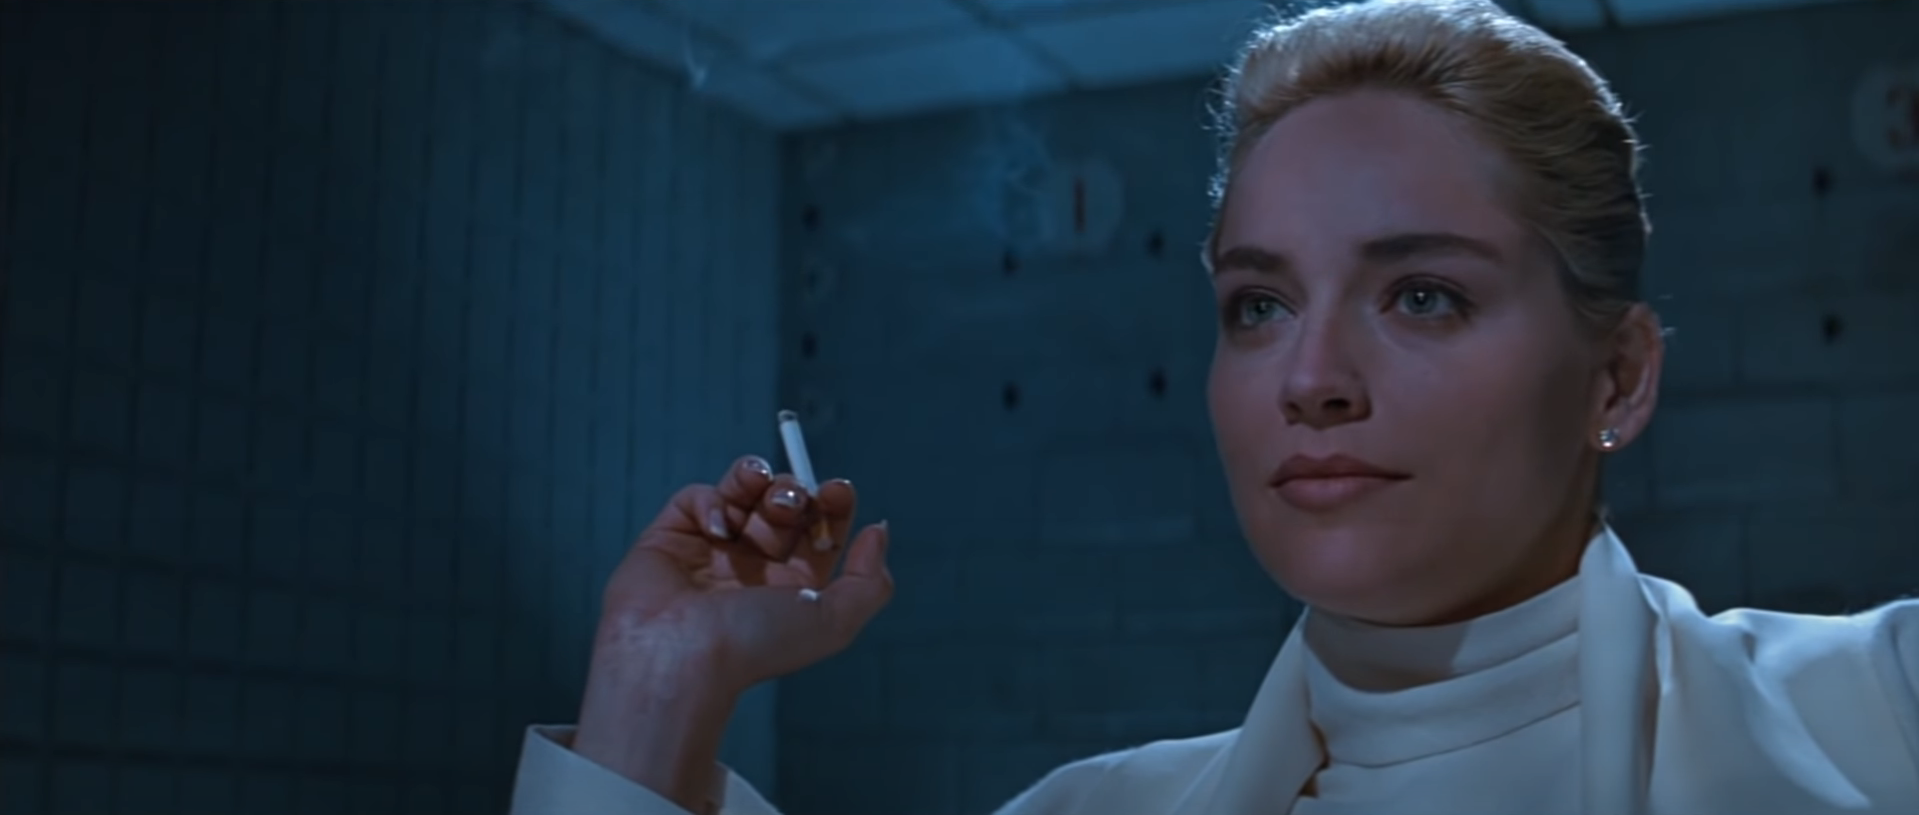 Sharon Stone will play a villain in the DC Comics adaptation